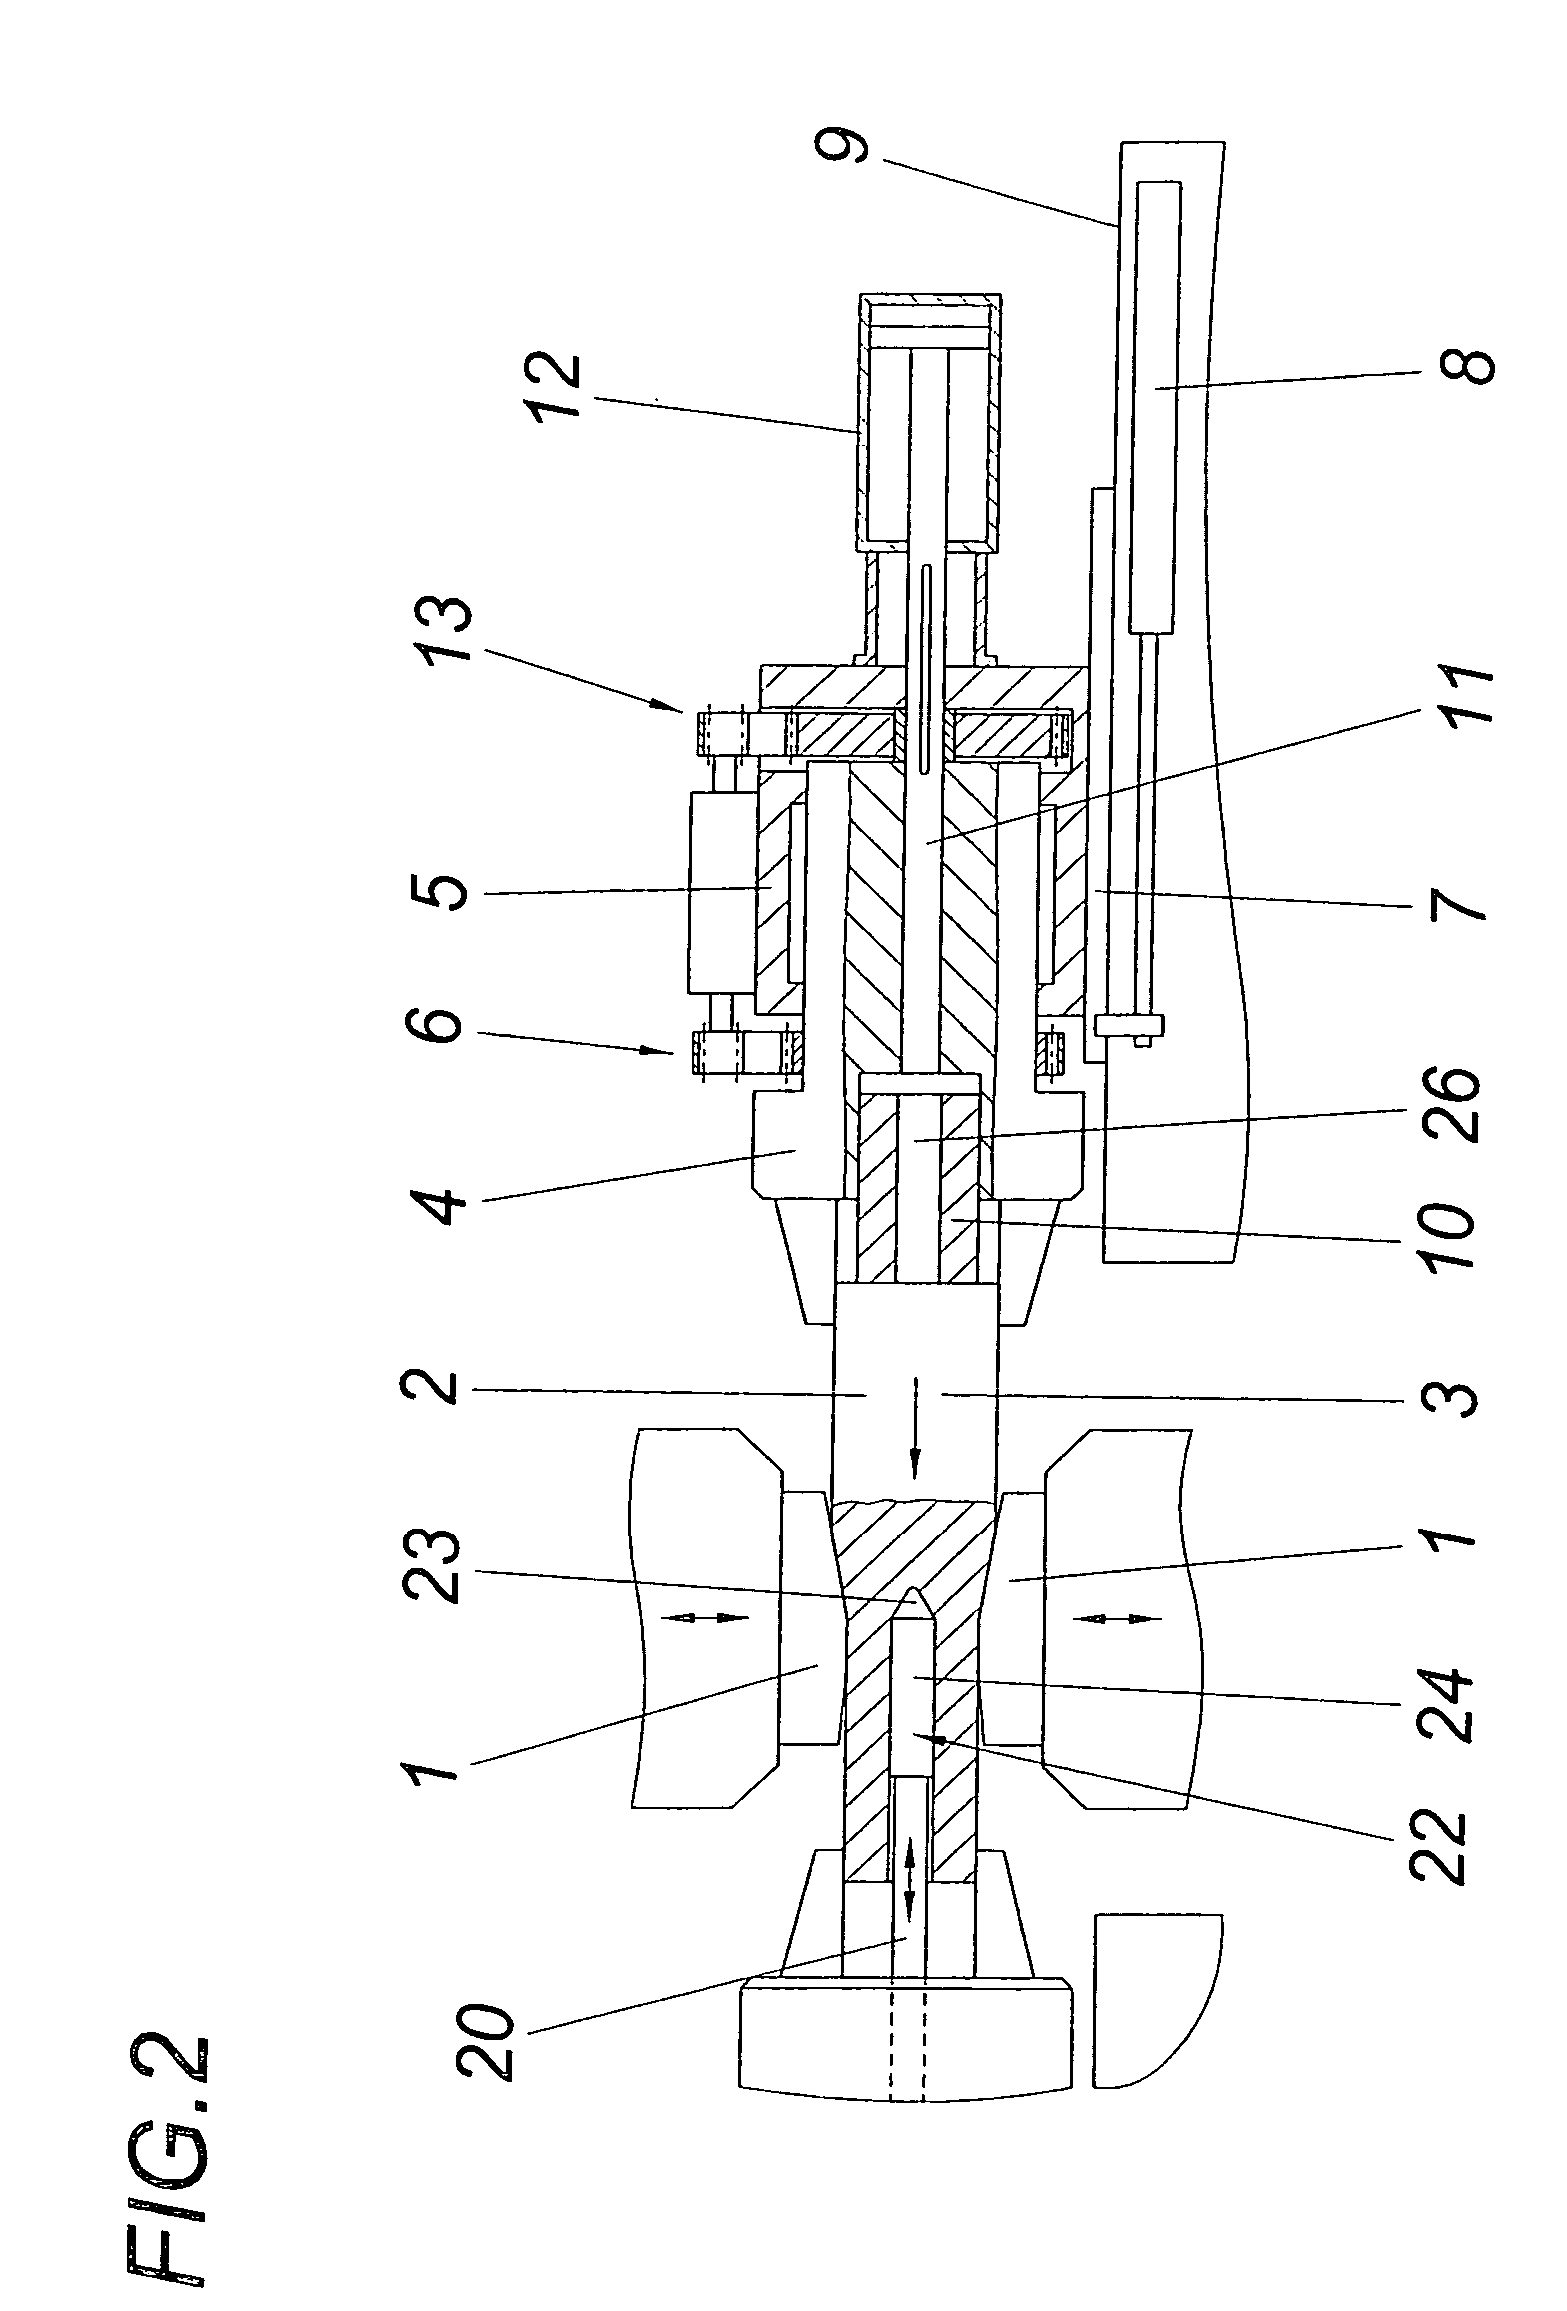 Method and apparatus for producing a cylindriacal hollow body from a blank